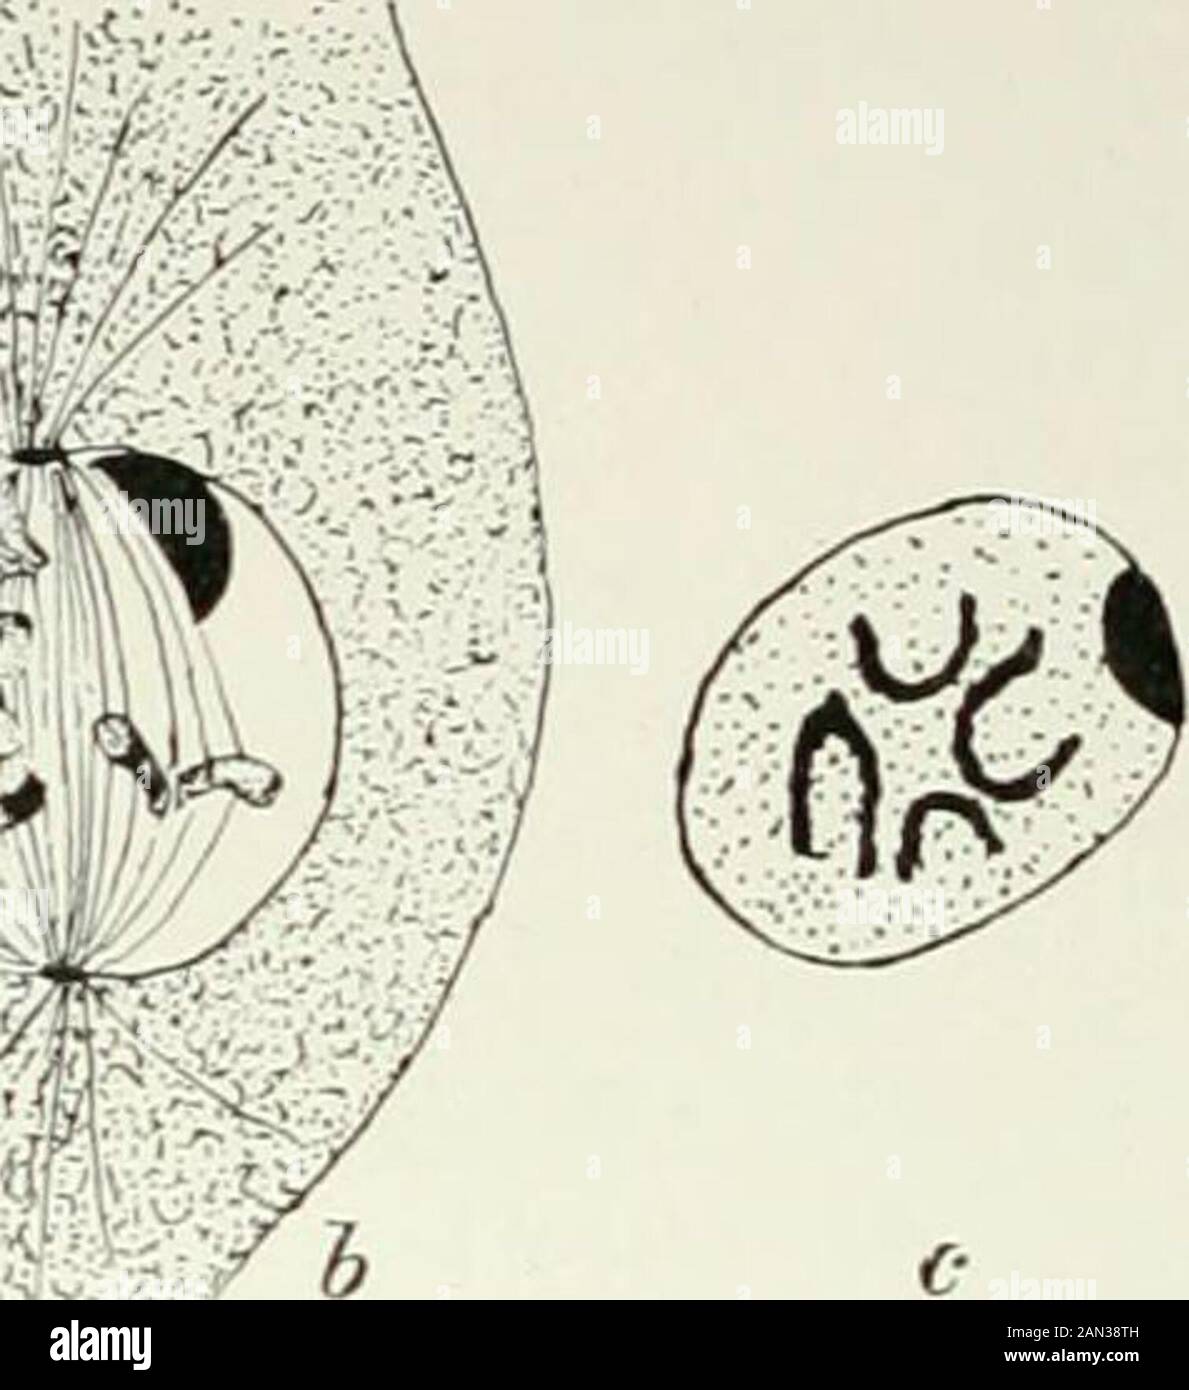 Fungi, Ascomycetes, Ustilaginales, Uredinales . f ., ?? ?:. ? 9. ?. ... ??:-;?? b Fig. 14J. Laboulbenia chaetophora (?). «. cell formed by binucleateoogonial and trichophoric cells, x 430; b. first division in ascusdescribed by Fauil as the anaphase, K1510; c. nuclear division inspore, showing four chromosomes, X2800; after Faull. Since almost all our knowledge of the group is due to the brilliant workof Professor Thaxter of Harvard it follows that the North American speciesare far better known than those of other localities. Such material as he wasable to obtain from warmer regions proved, Stock Photo